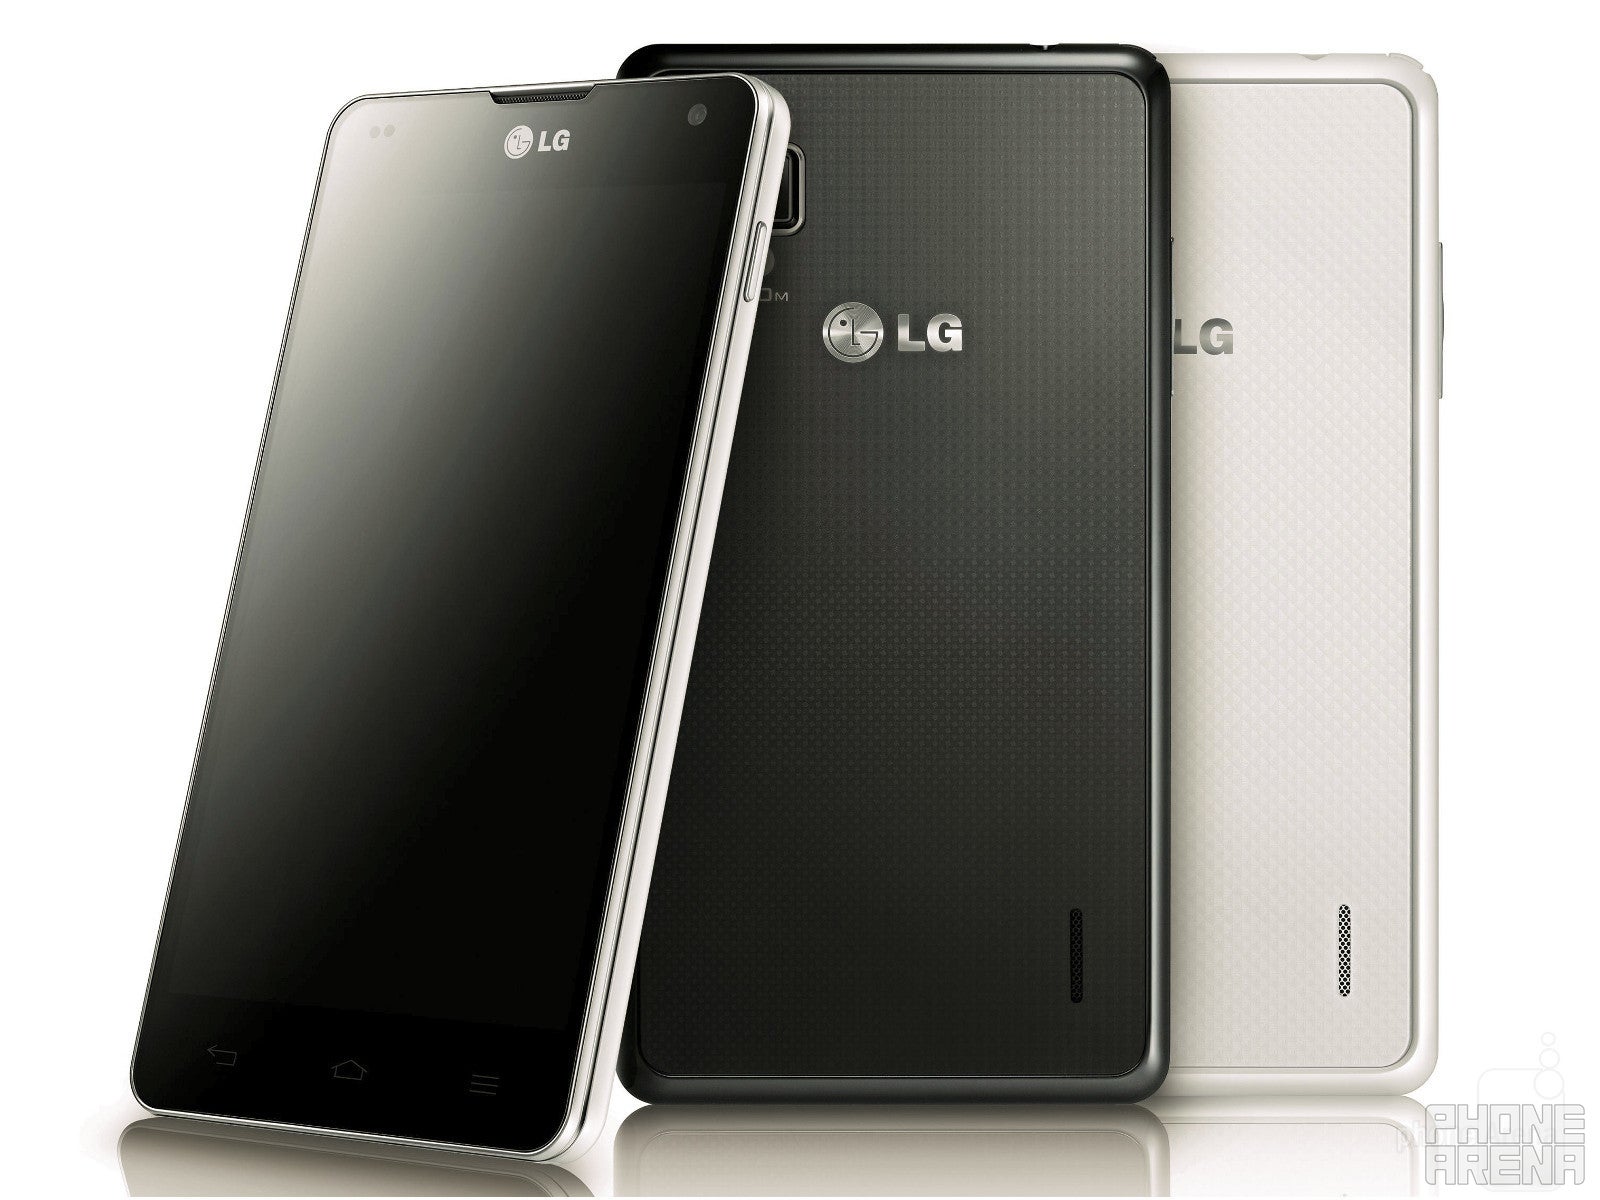 The LG Optimus G will feature the super-fast Snapdragon S4 Pro chipset - LG Optimus G vs the competition: poll results